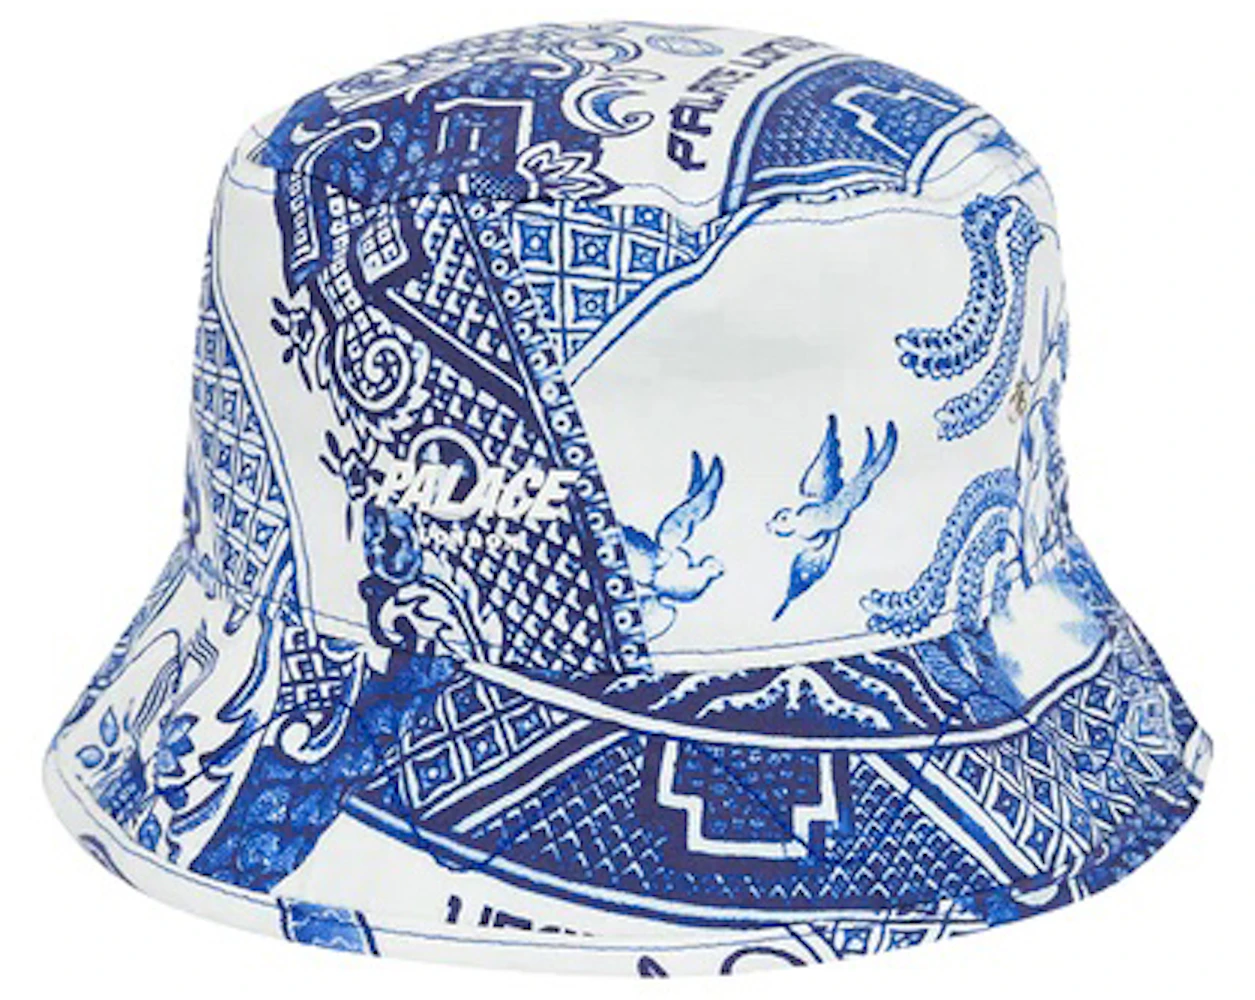 Buy Wholesale China Replica Famous Brand Channel Bucket Hat For